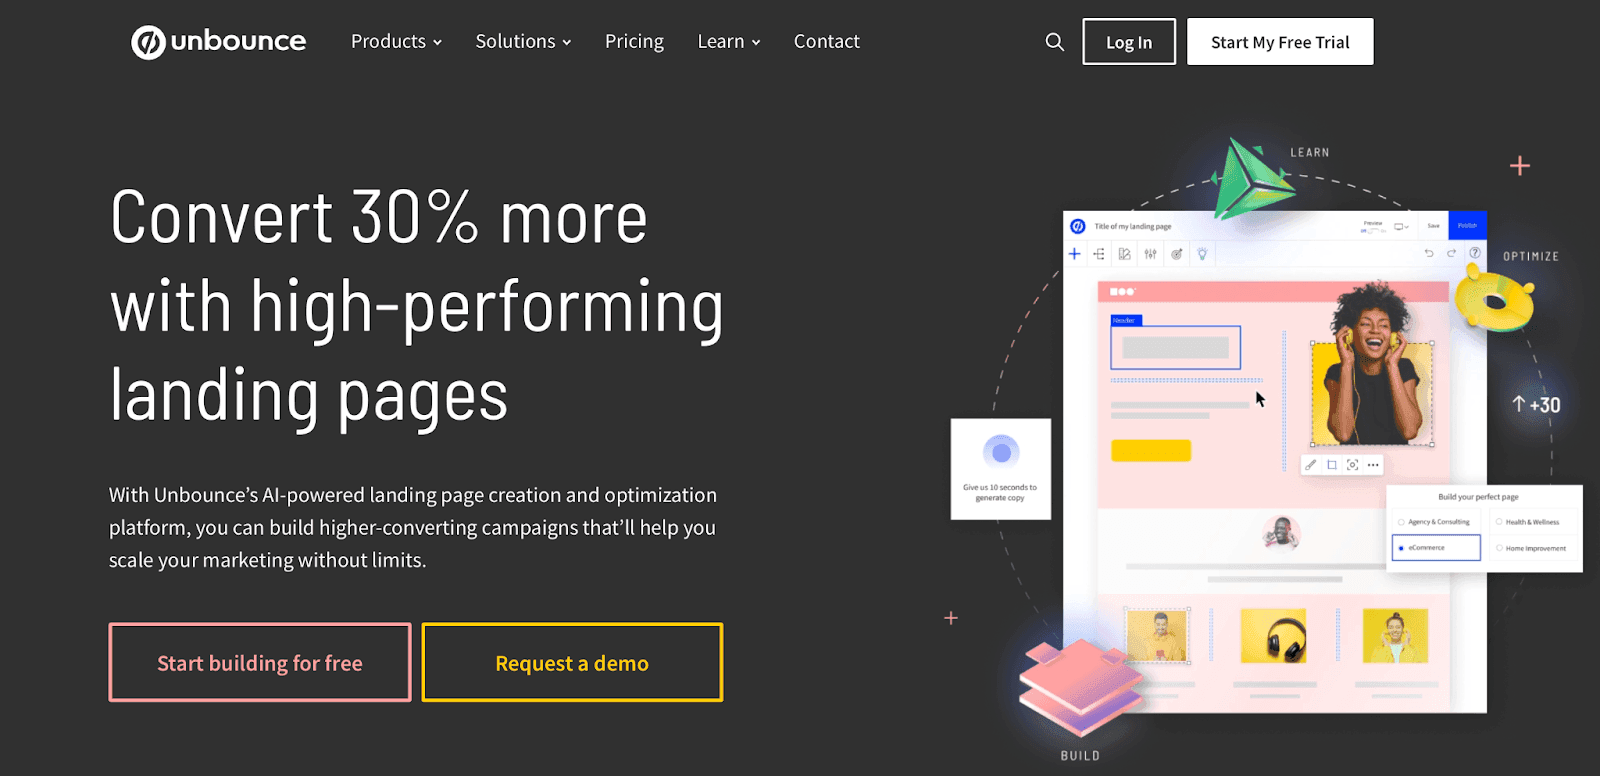 Unbounce website - Convert 30% more with high performing landing pages